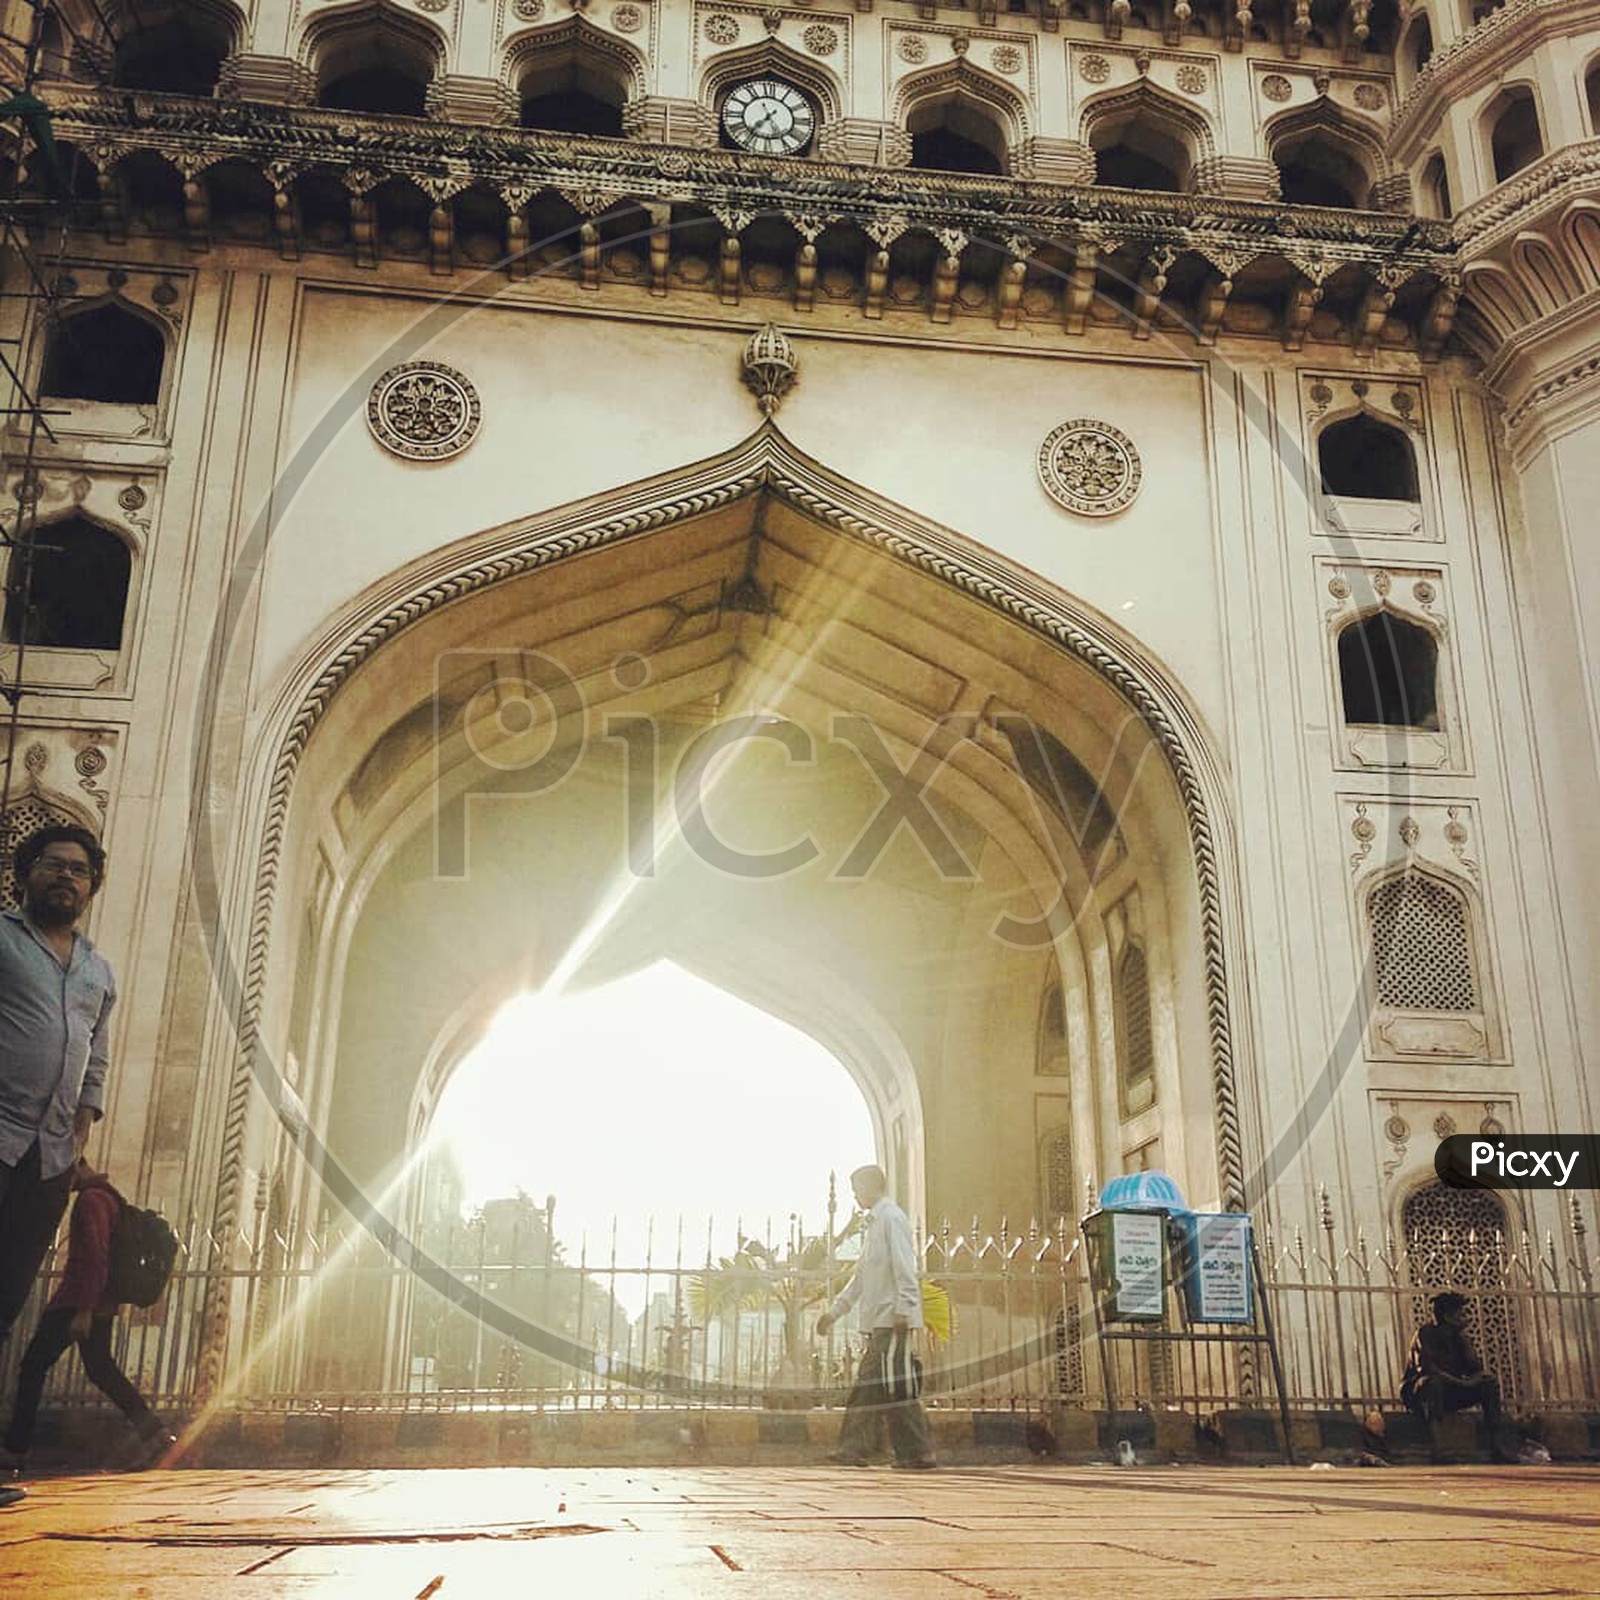 sunrise at charminar and people moving around